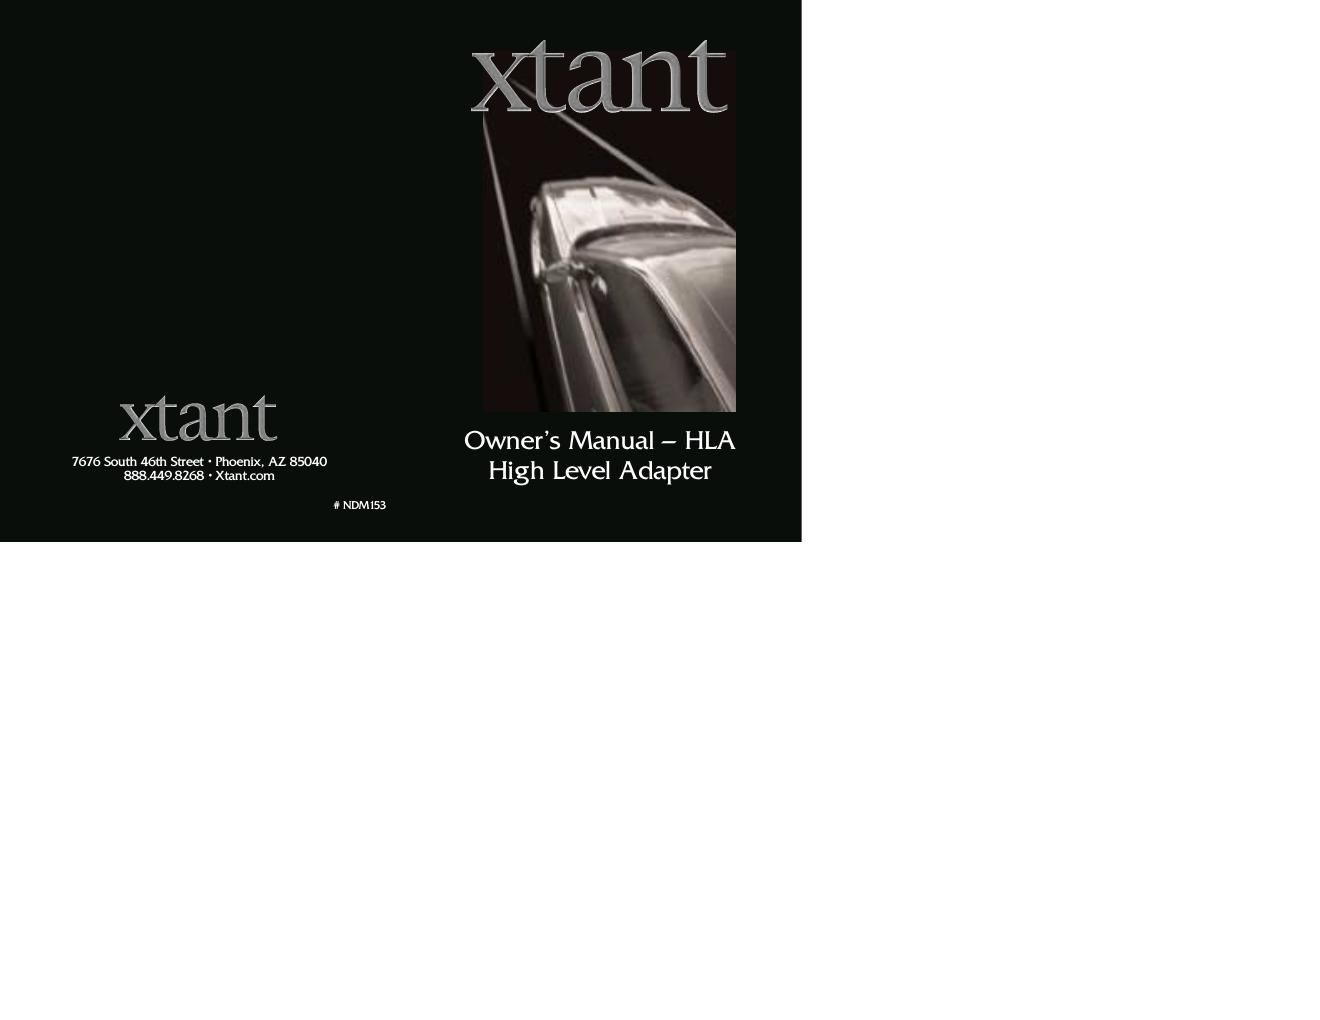 xtant hla owners manual